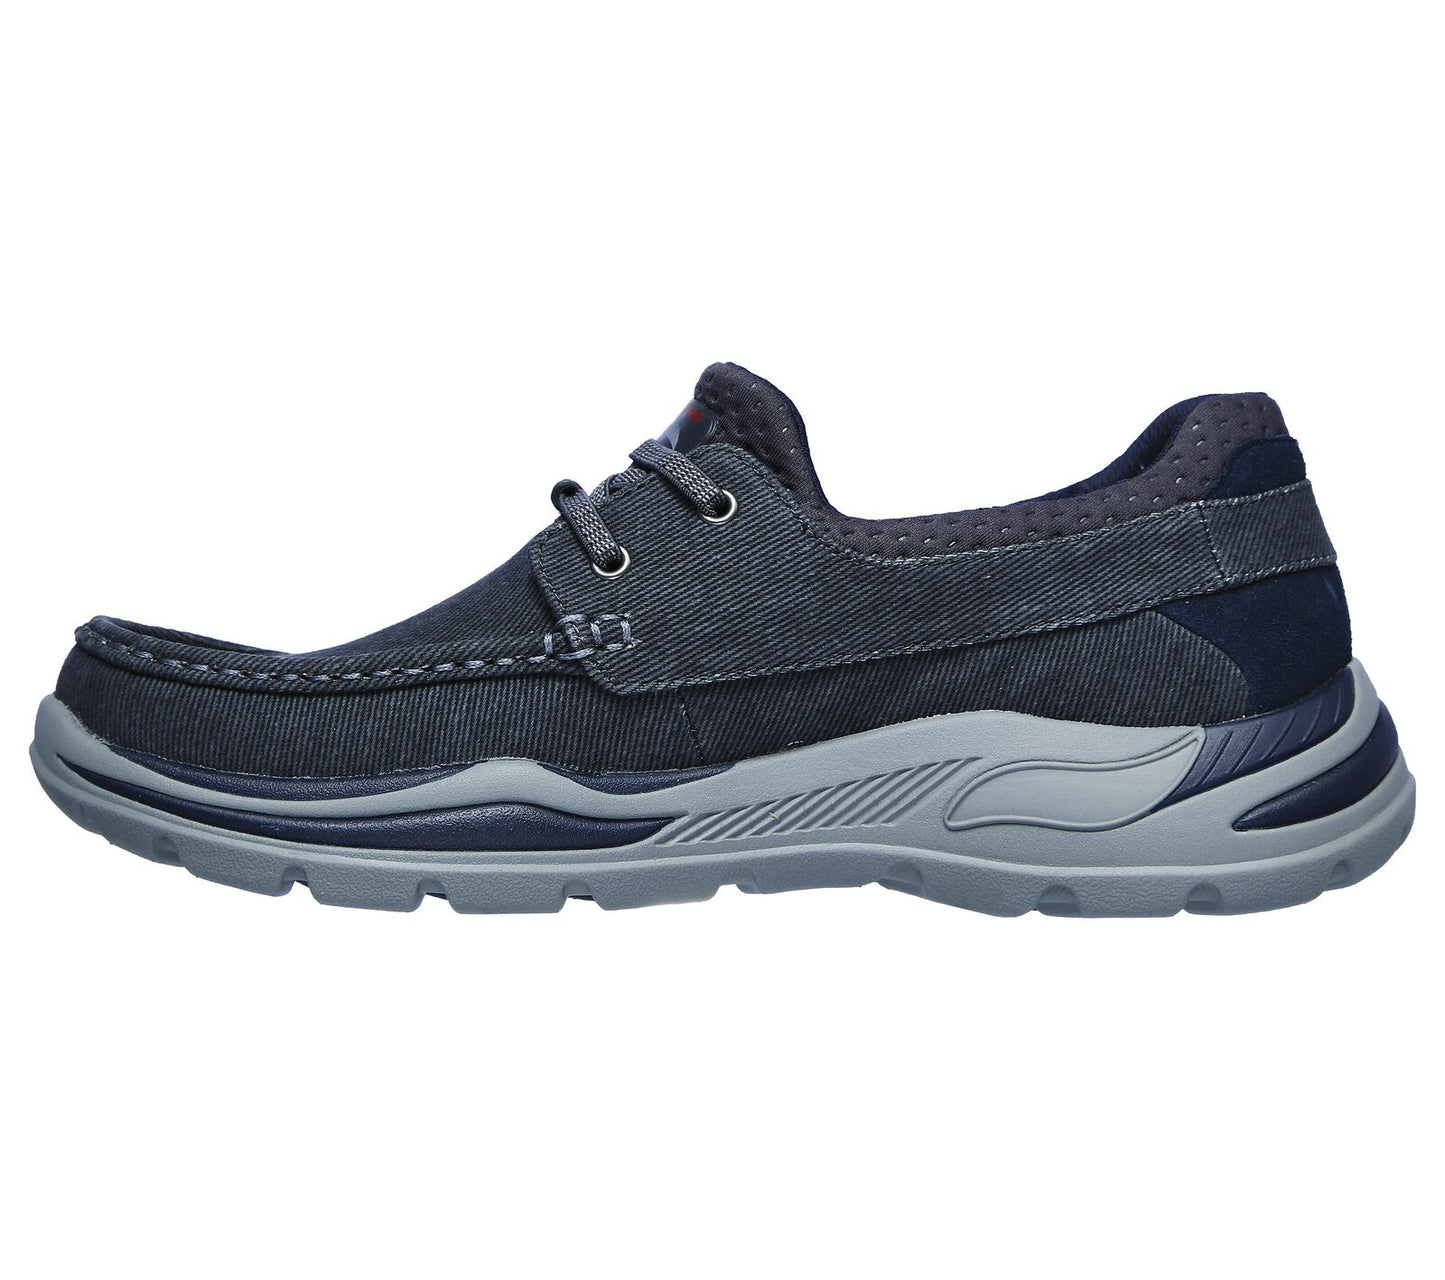 SKECHERS ARCH FIT MOTLEY OVEN - NAVY